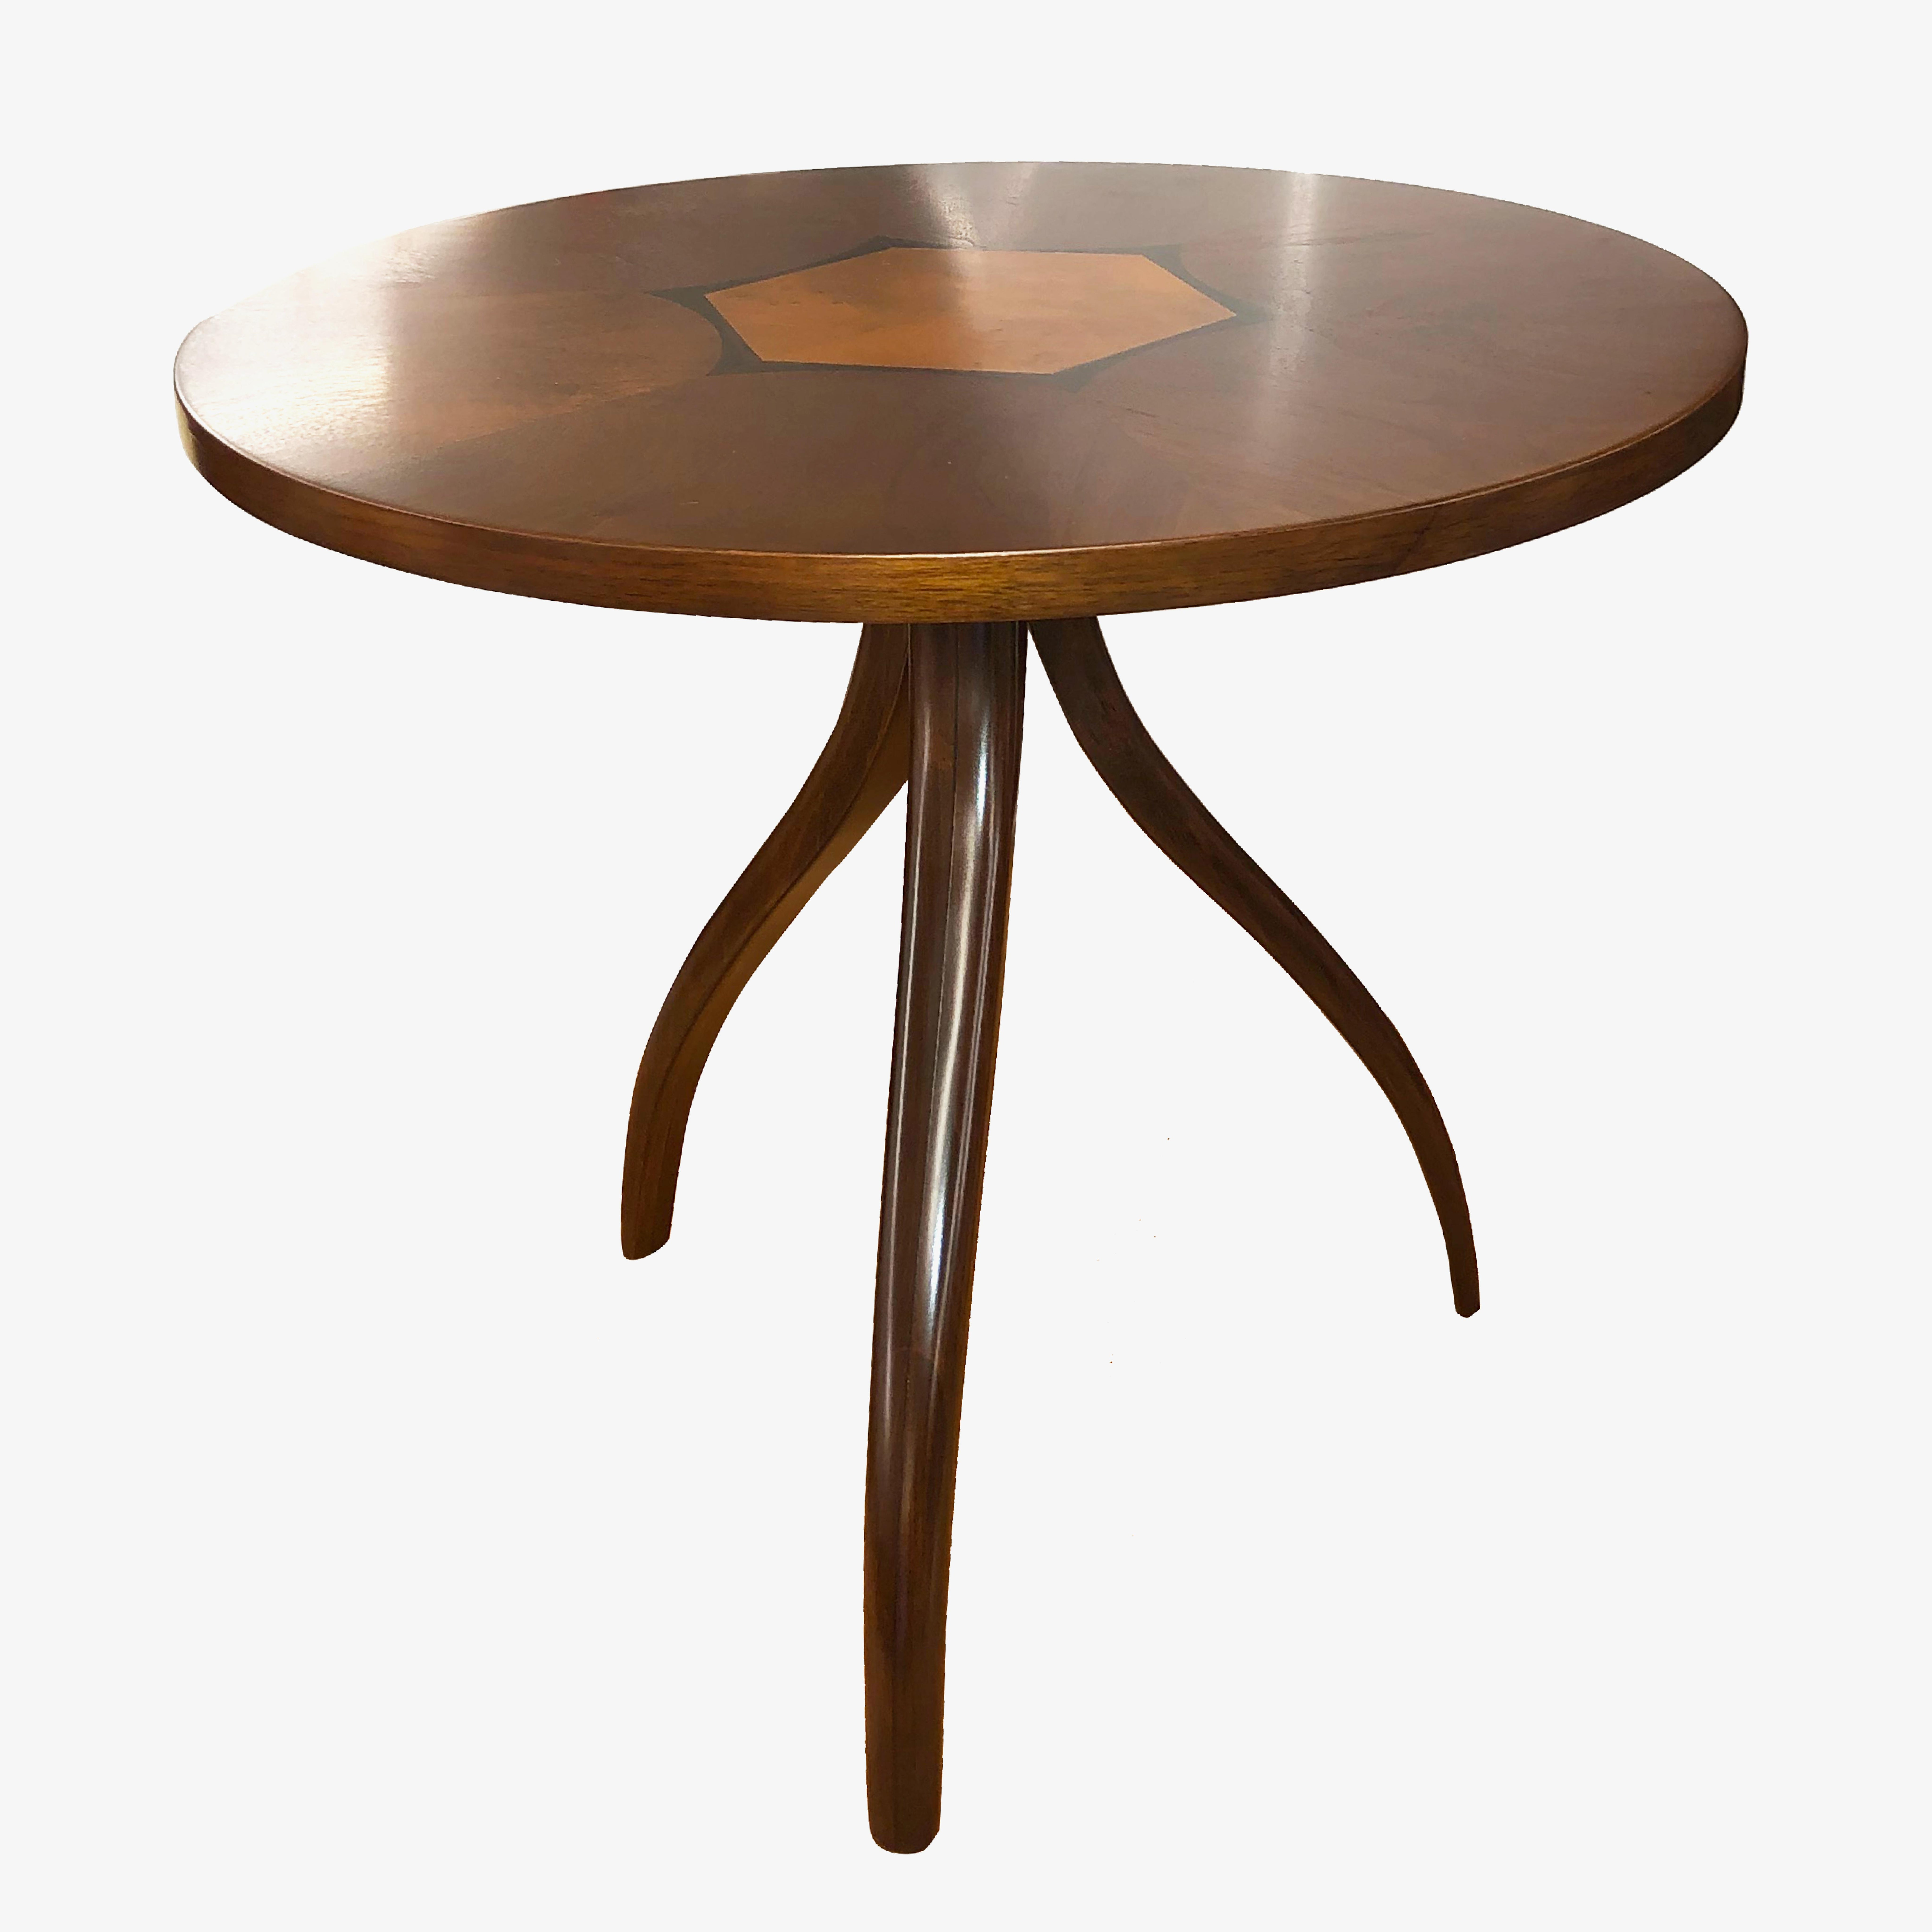 This charming and captivating side table was designed by Kipp Stewart and manufactured by Drexel for their “Composite” series circa 1960’s. Beautifully crafted in walnut wood, this table features sculptural tripod legs that support the round table